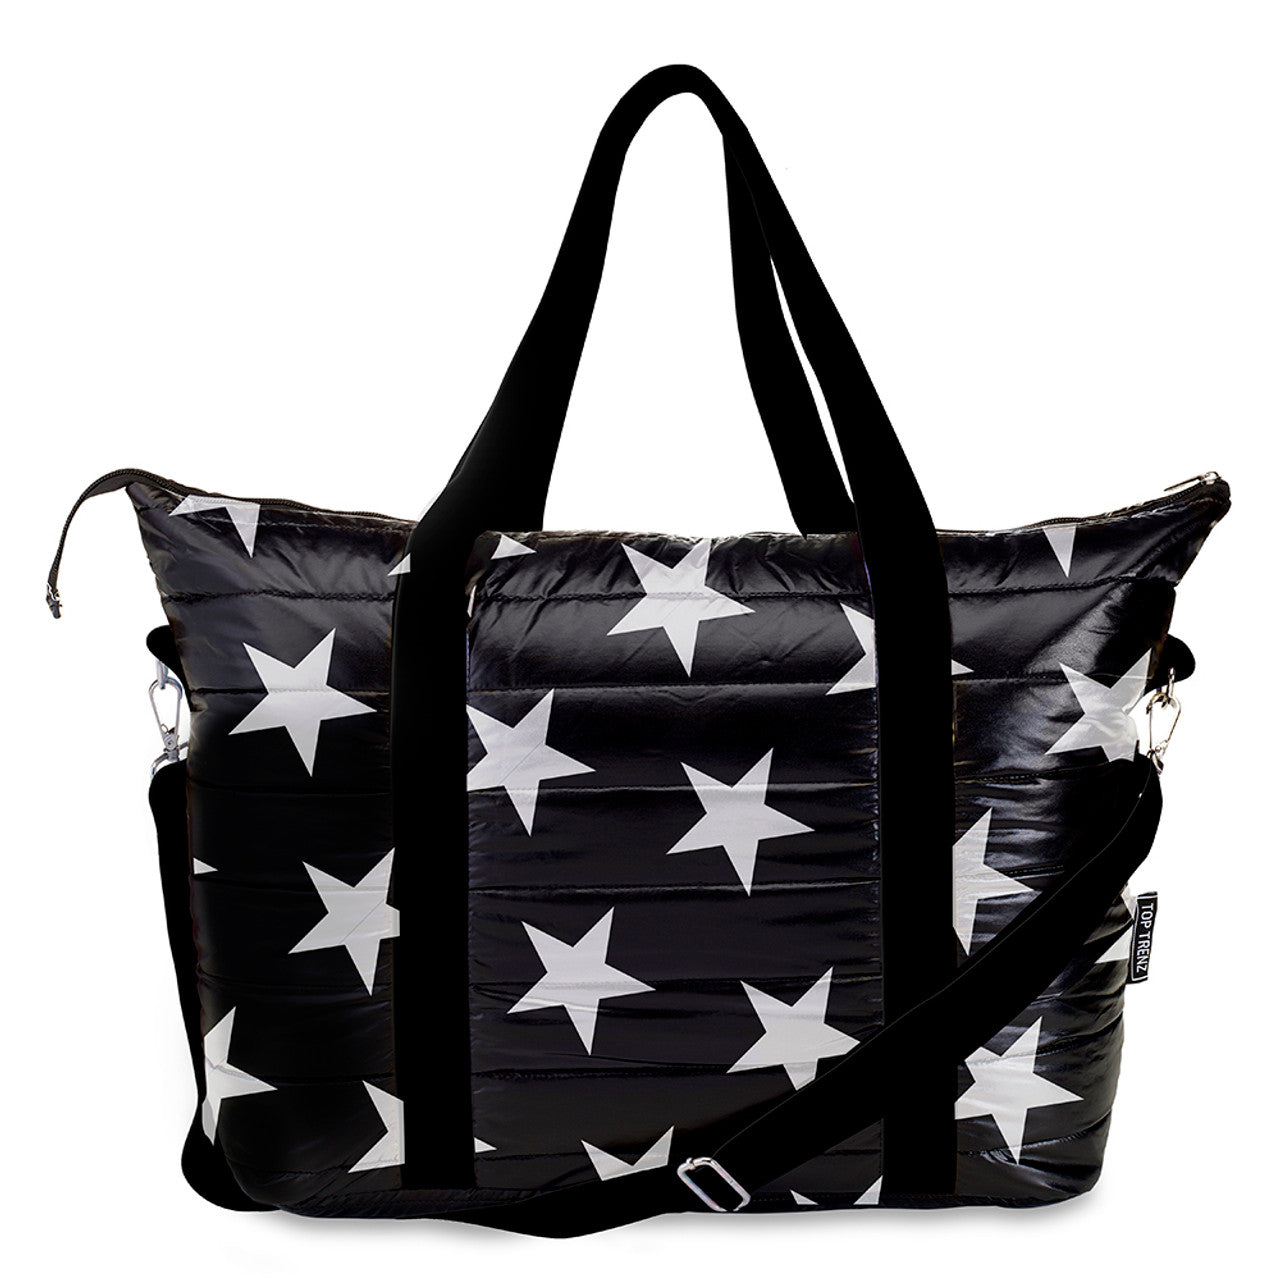 Black Puffer Star Time Tote